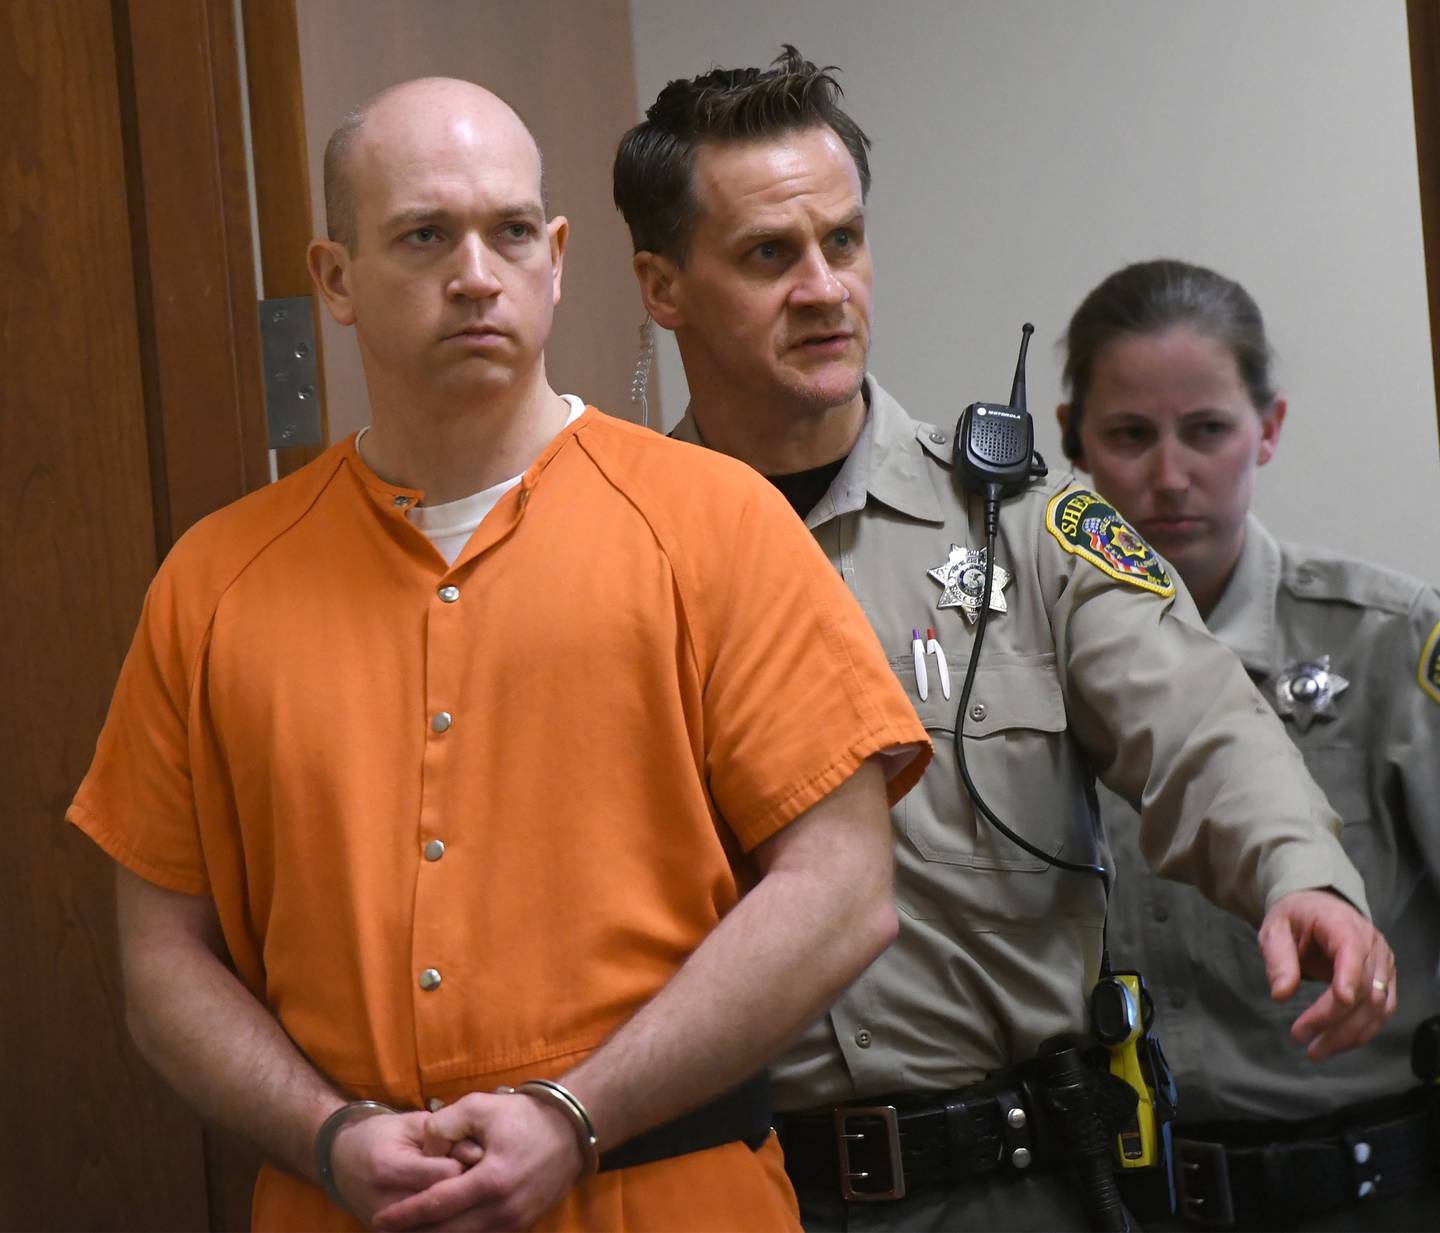 Matthew Plote, 34, of Malta, in escorted into an Ogle County courtroom on Friday afternoon. He is charged with the 2020 murders of Melissa Lamesch and her unborn child. Both were found dead in the Lamesch home in Mt. Morris after a Nov. 25, 2020, fire.